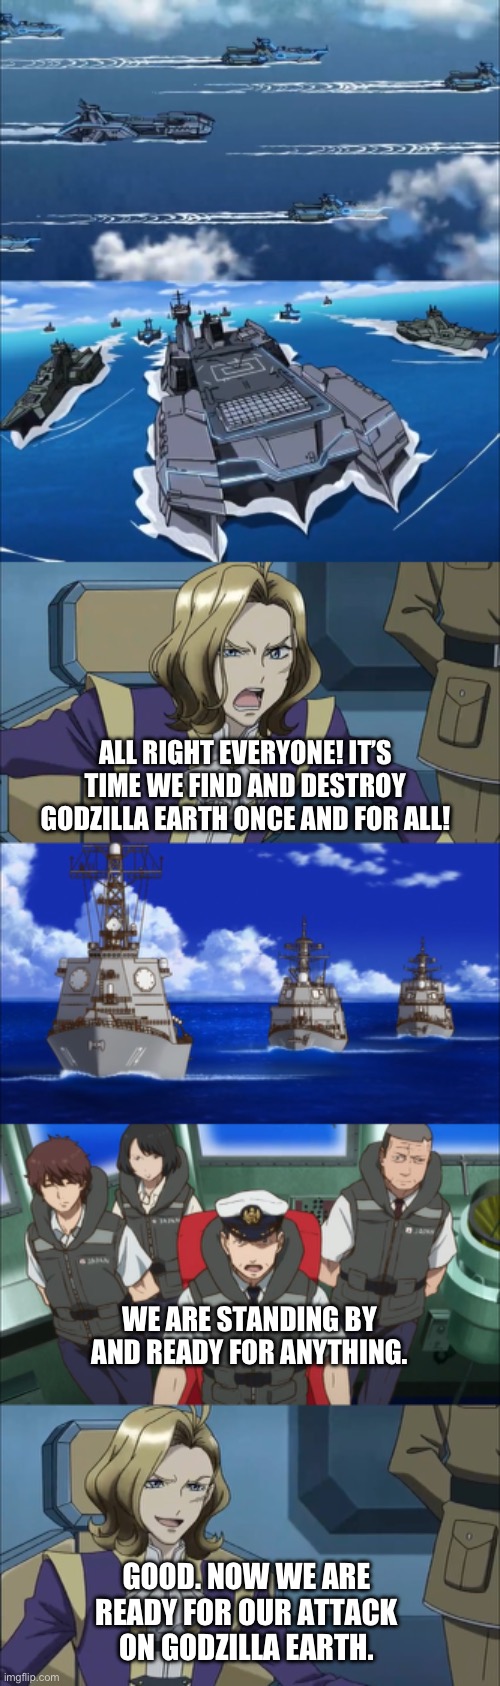 Julio searching for Godzilla Earth | ALL RIGHT EVERYONE! IT’S TIME WE FIND AND DESTROY GODZILLA EARTH ONCE AND FOR ALL! WE ARE STANDING BY AND READY FOR ANYTHING. GOOD. NOW WE ARE READY FOR OUR ATTACK ON GODZILLA EARTH. | image tagged in anime | made w/ Imgflip meme maker